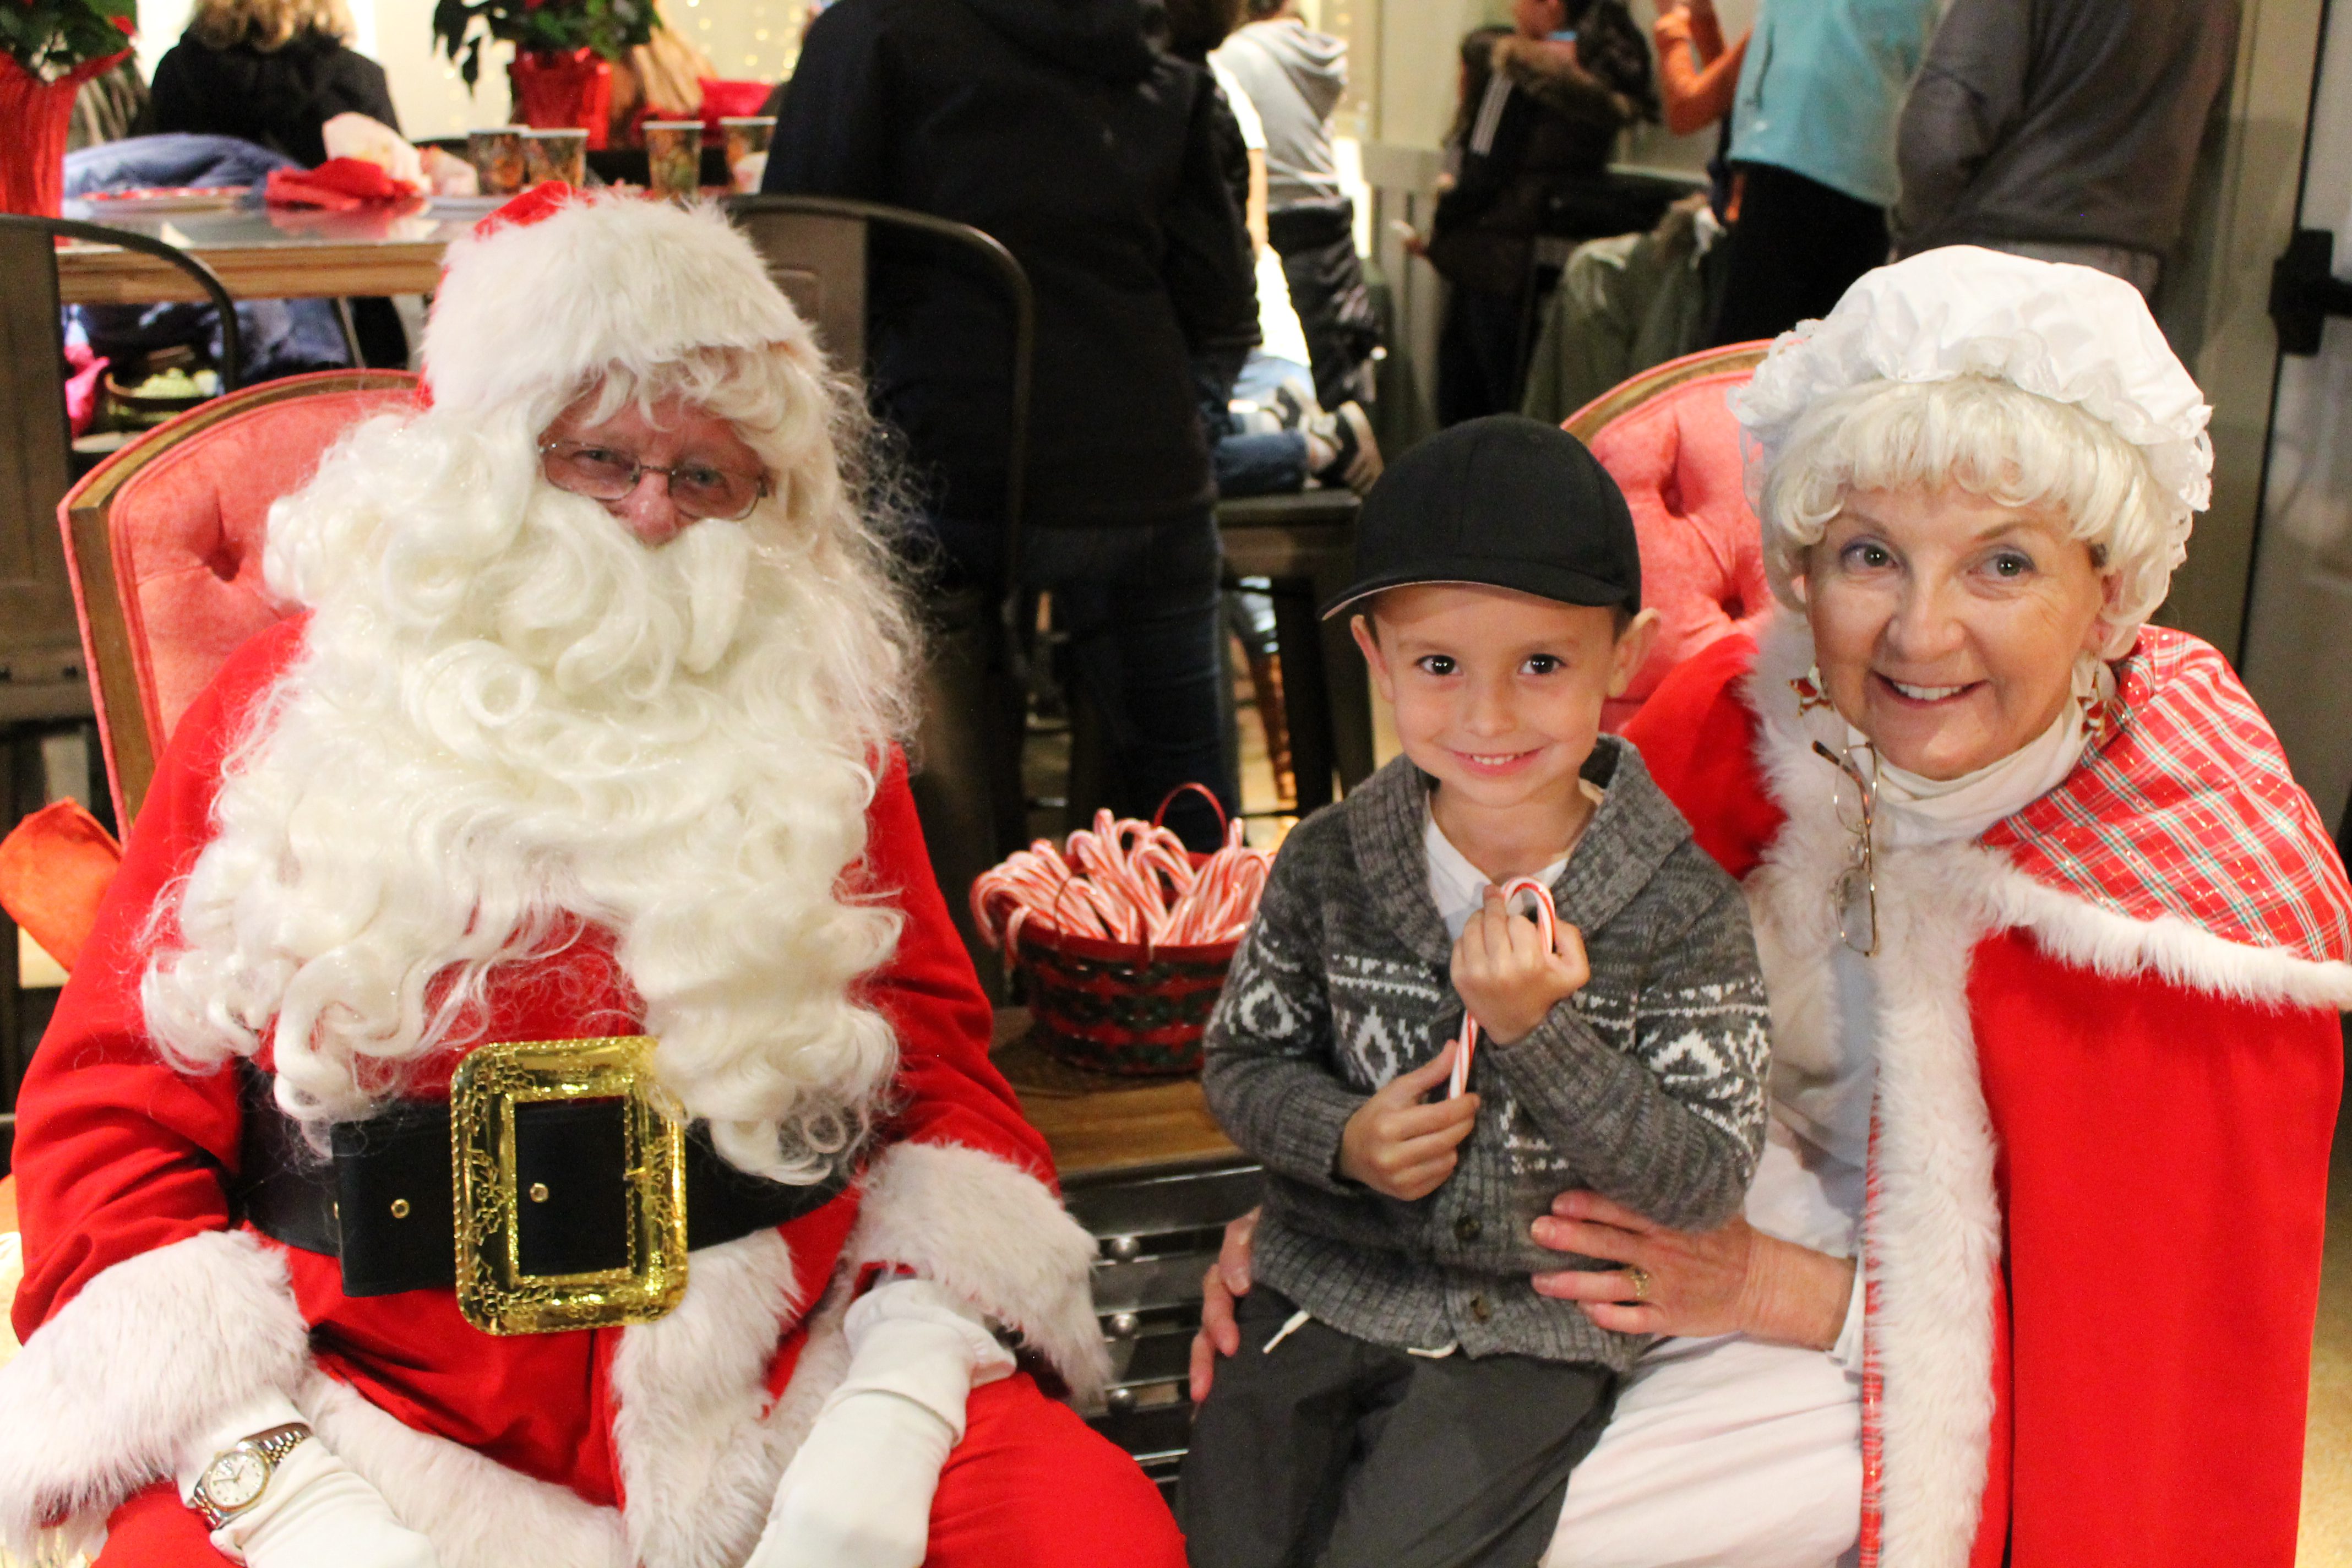 The valley celebrates Christmas in style